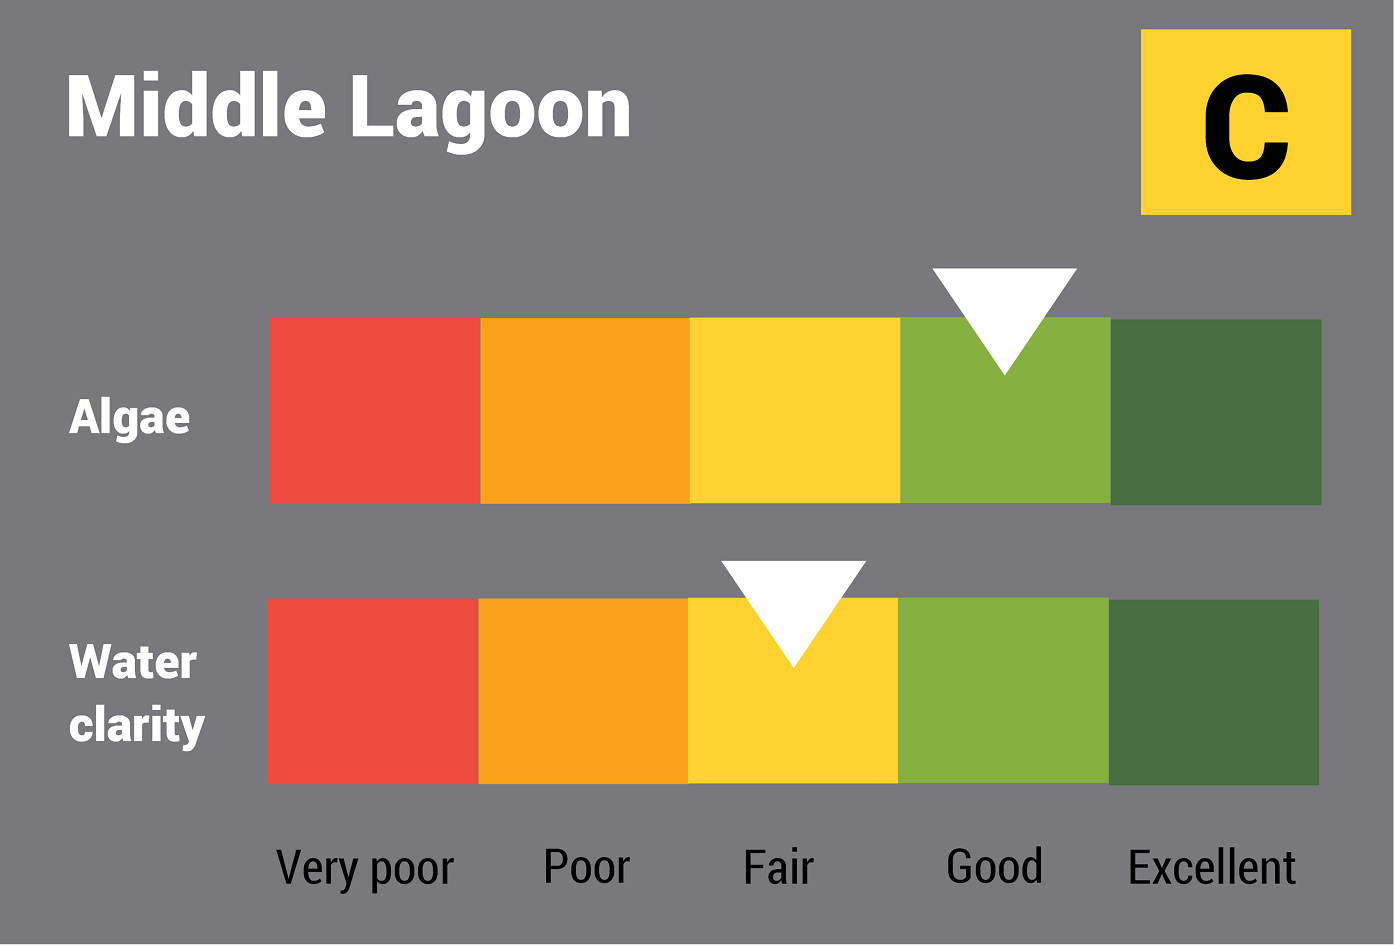 Middle Lagoon water quality report card for algae and water clarity showing colour-coded ratings (red, orange, yellow, light green and dark green, which represent very poor, poor, fair, good and excellent, respectively). Algae is rated 'fair' and water clarity is rated 'fair' giving an overall rating of 'fair' or 'C'.